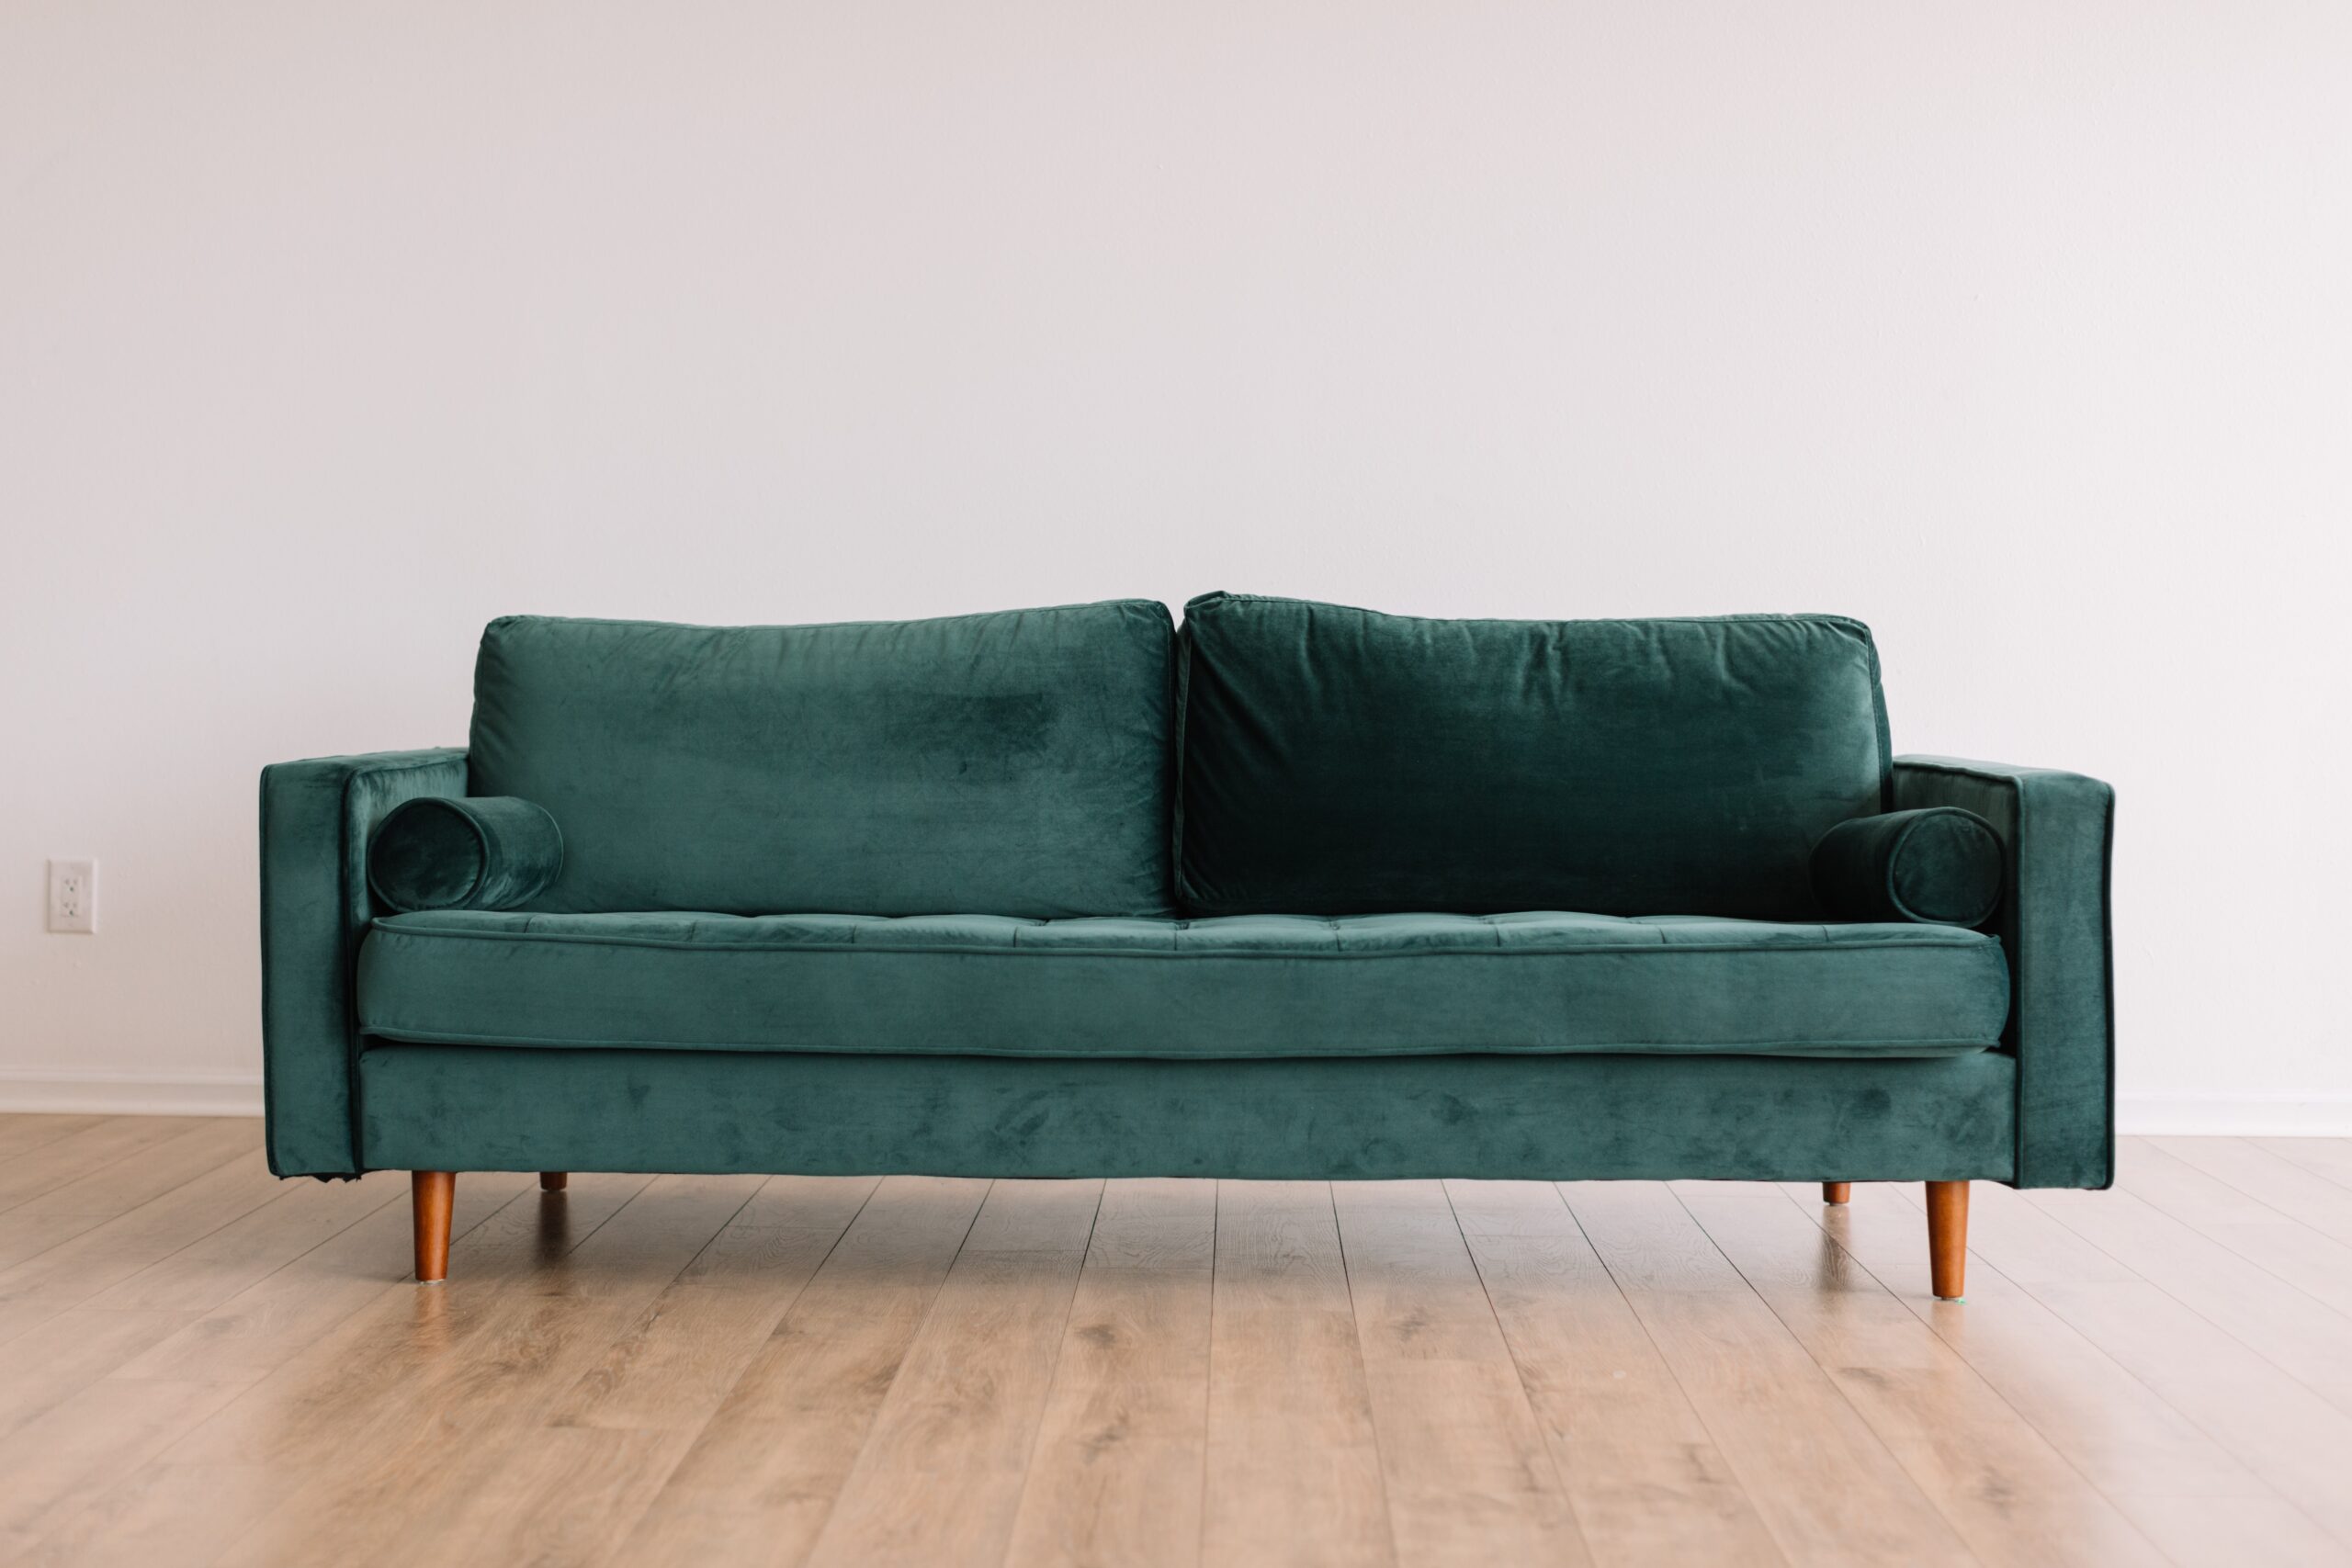 "Choosing the Right Sofa Size for Your Space"